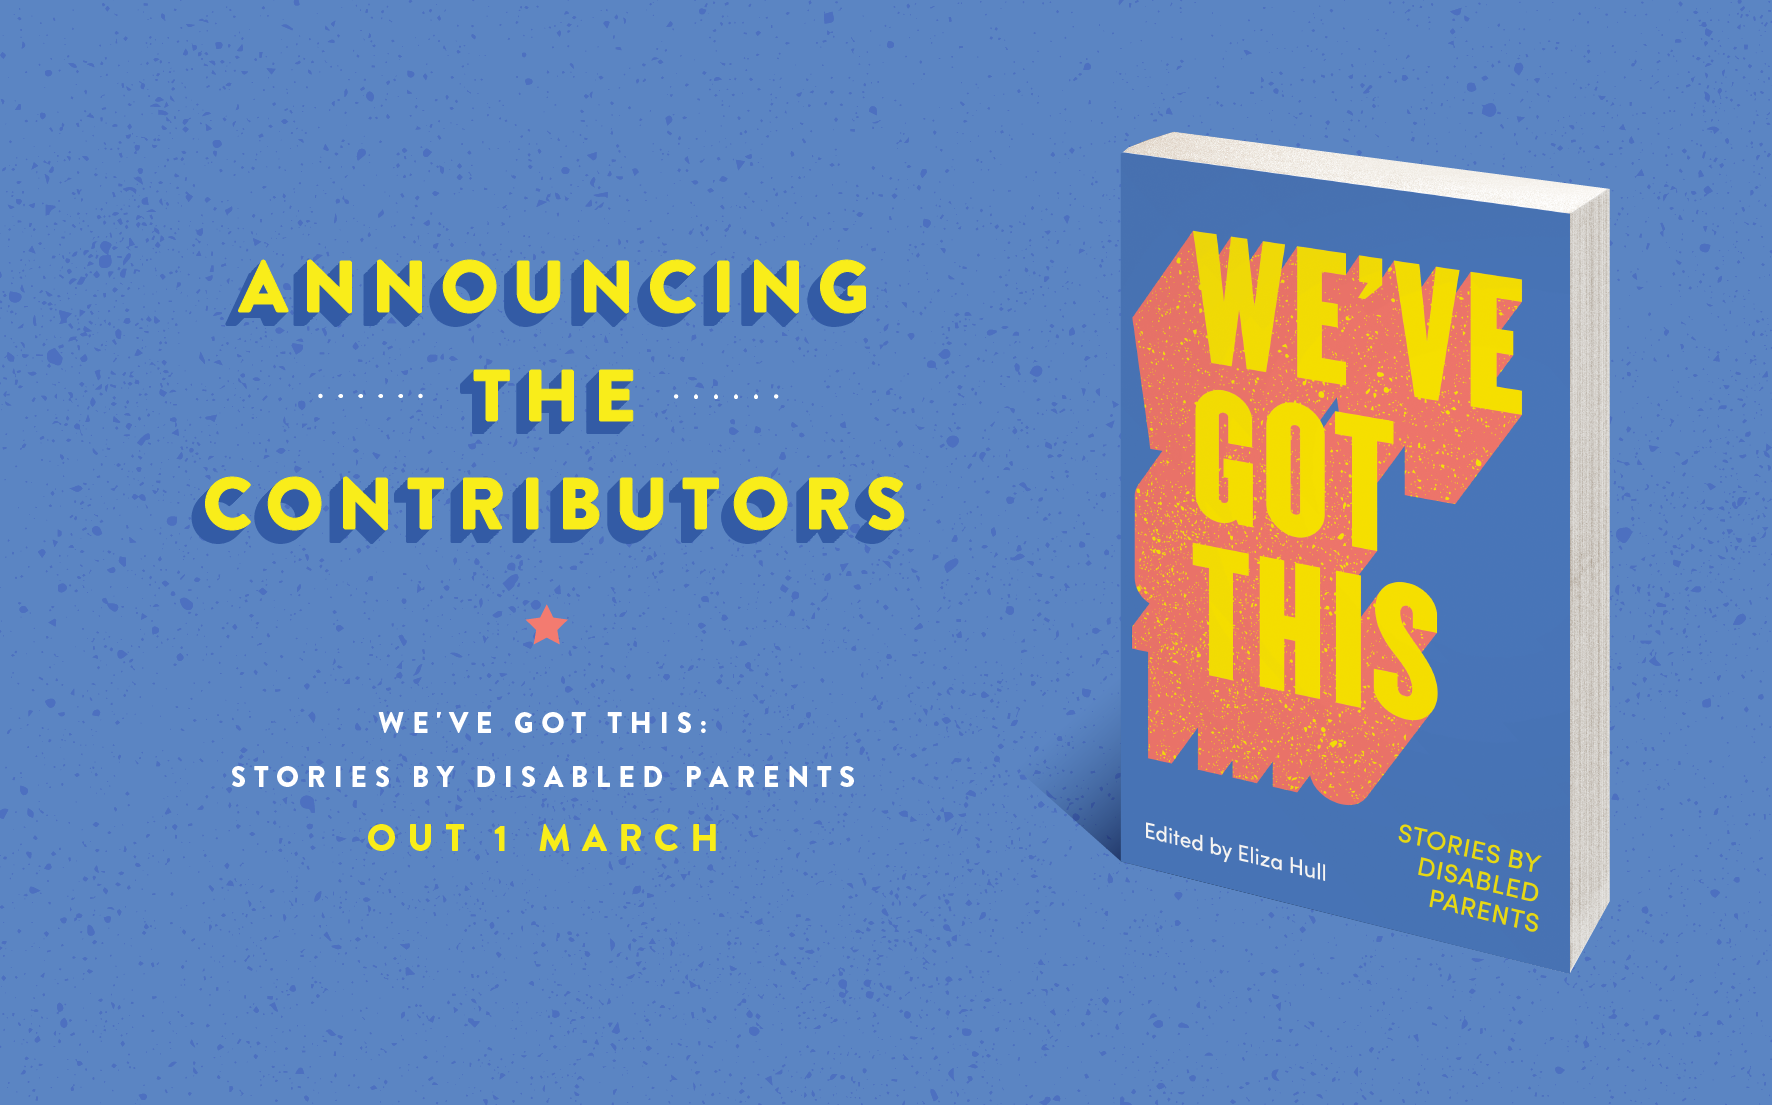 Announcing the contributors: We've Got This